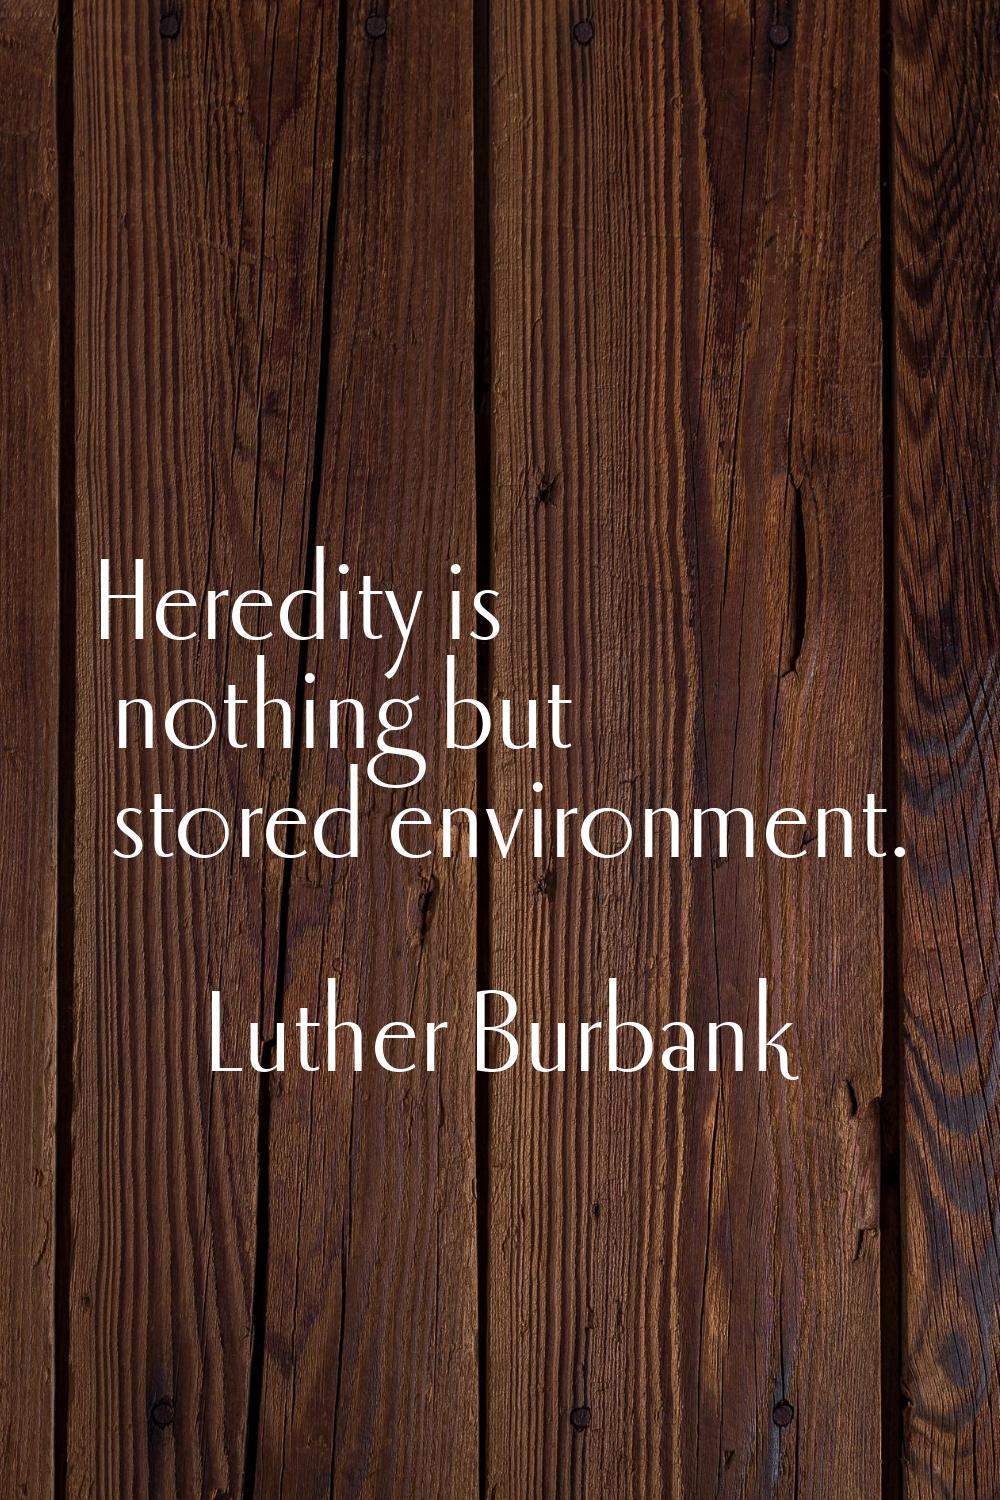 Heredity is nothing but stored environment.